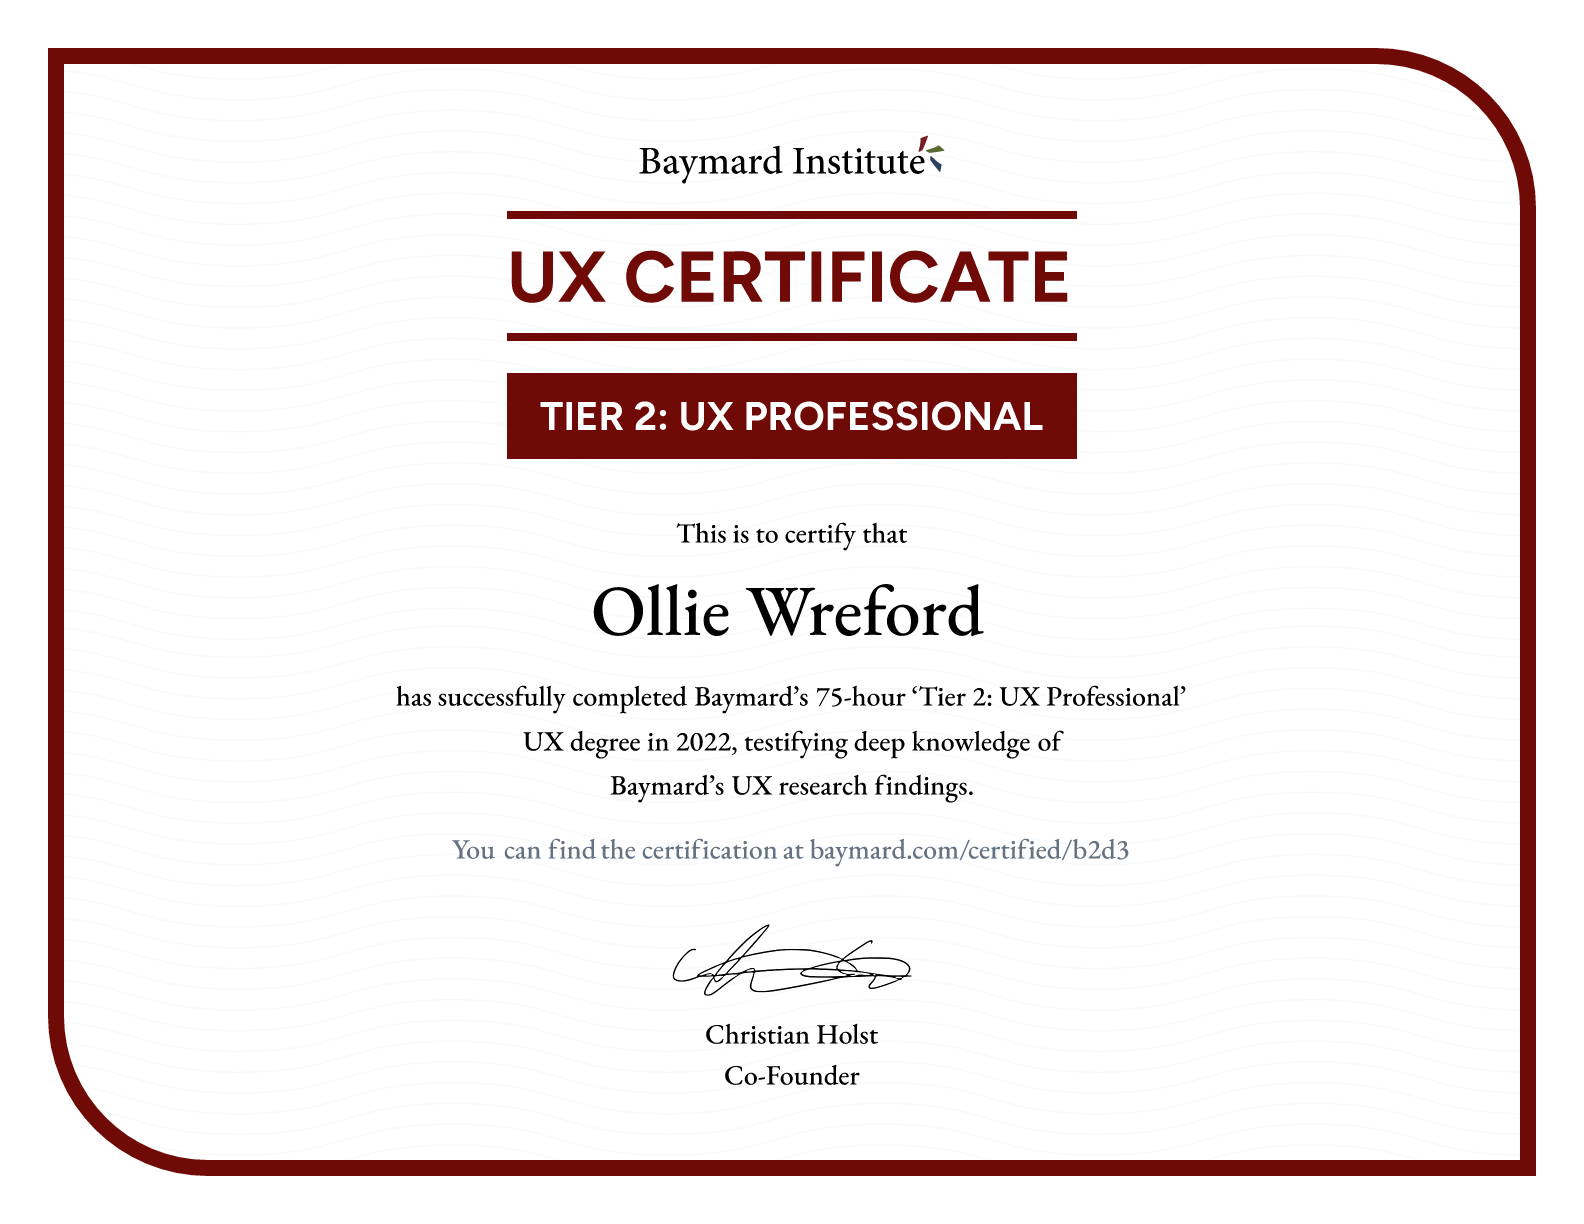 Ollie Wreford’s certificate